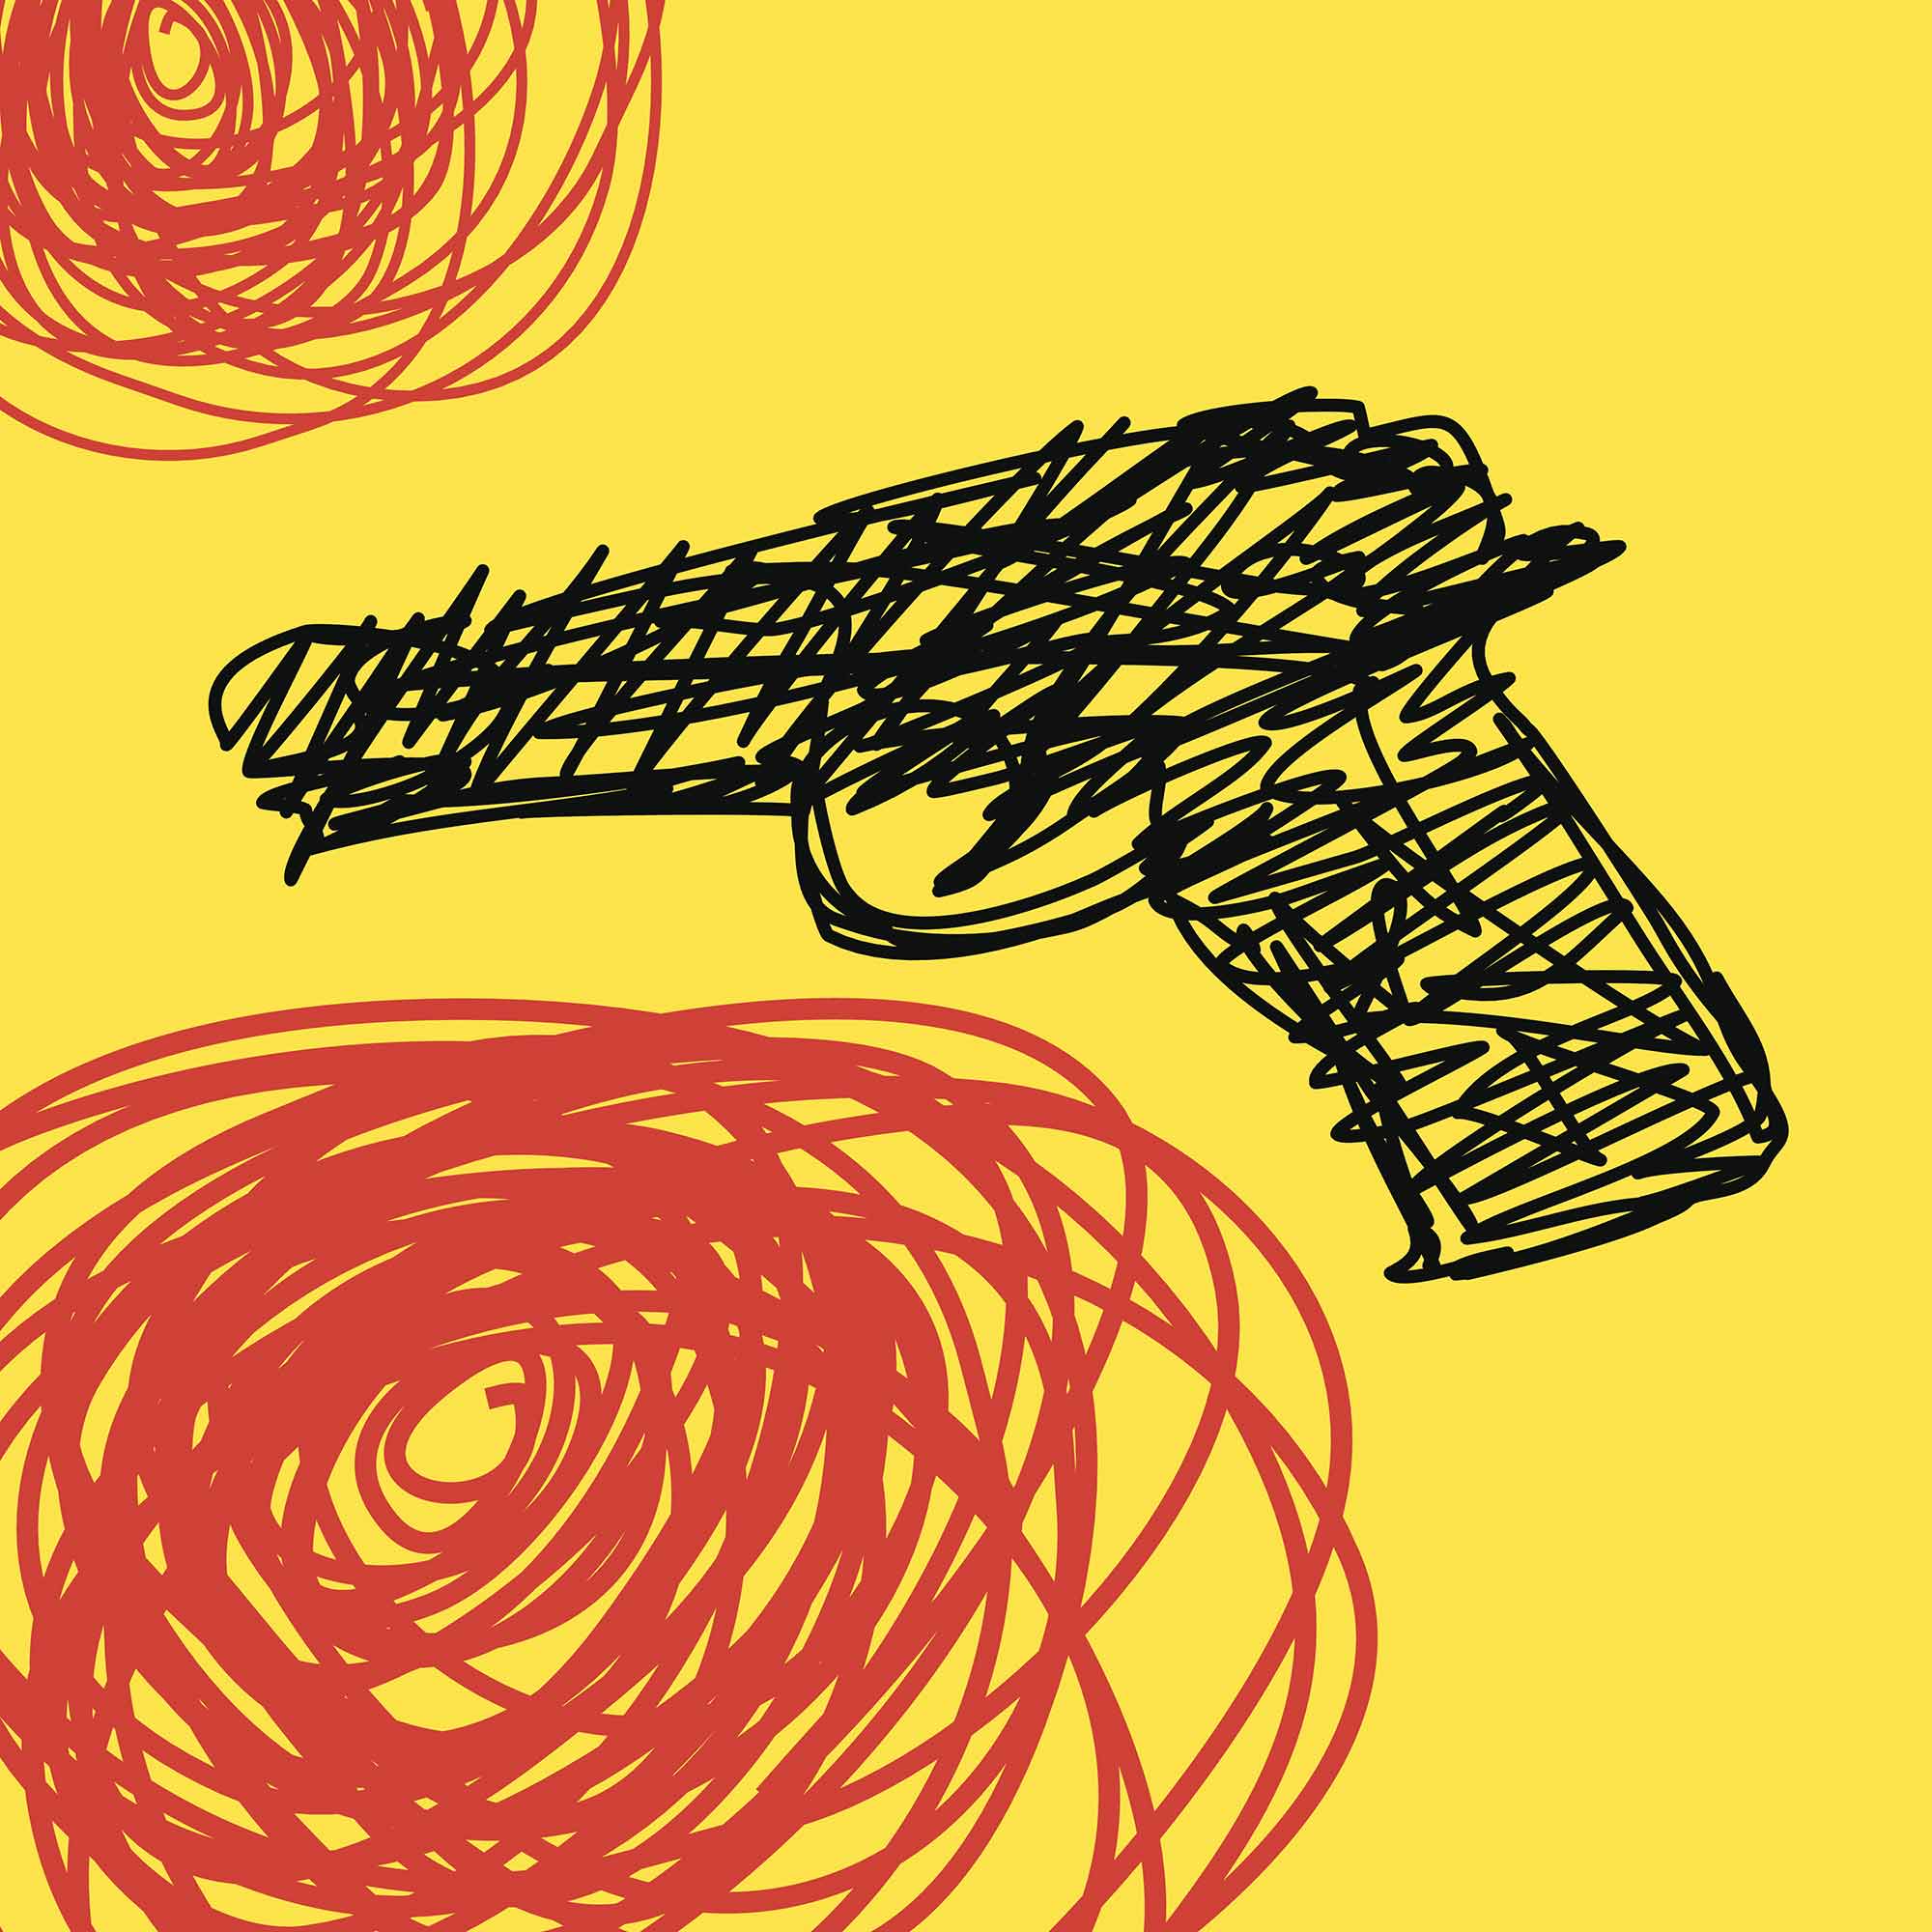 Illustration of a handgun and pools of red blood scribbled in marker